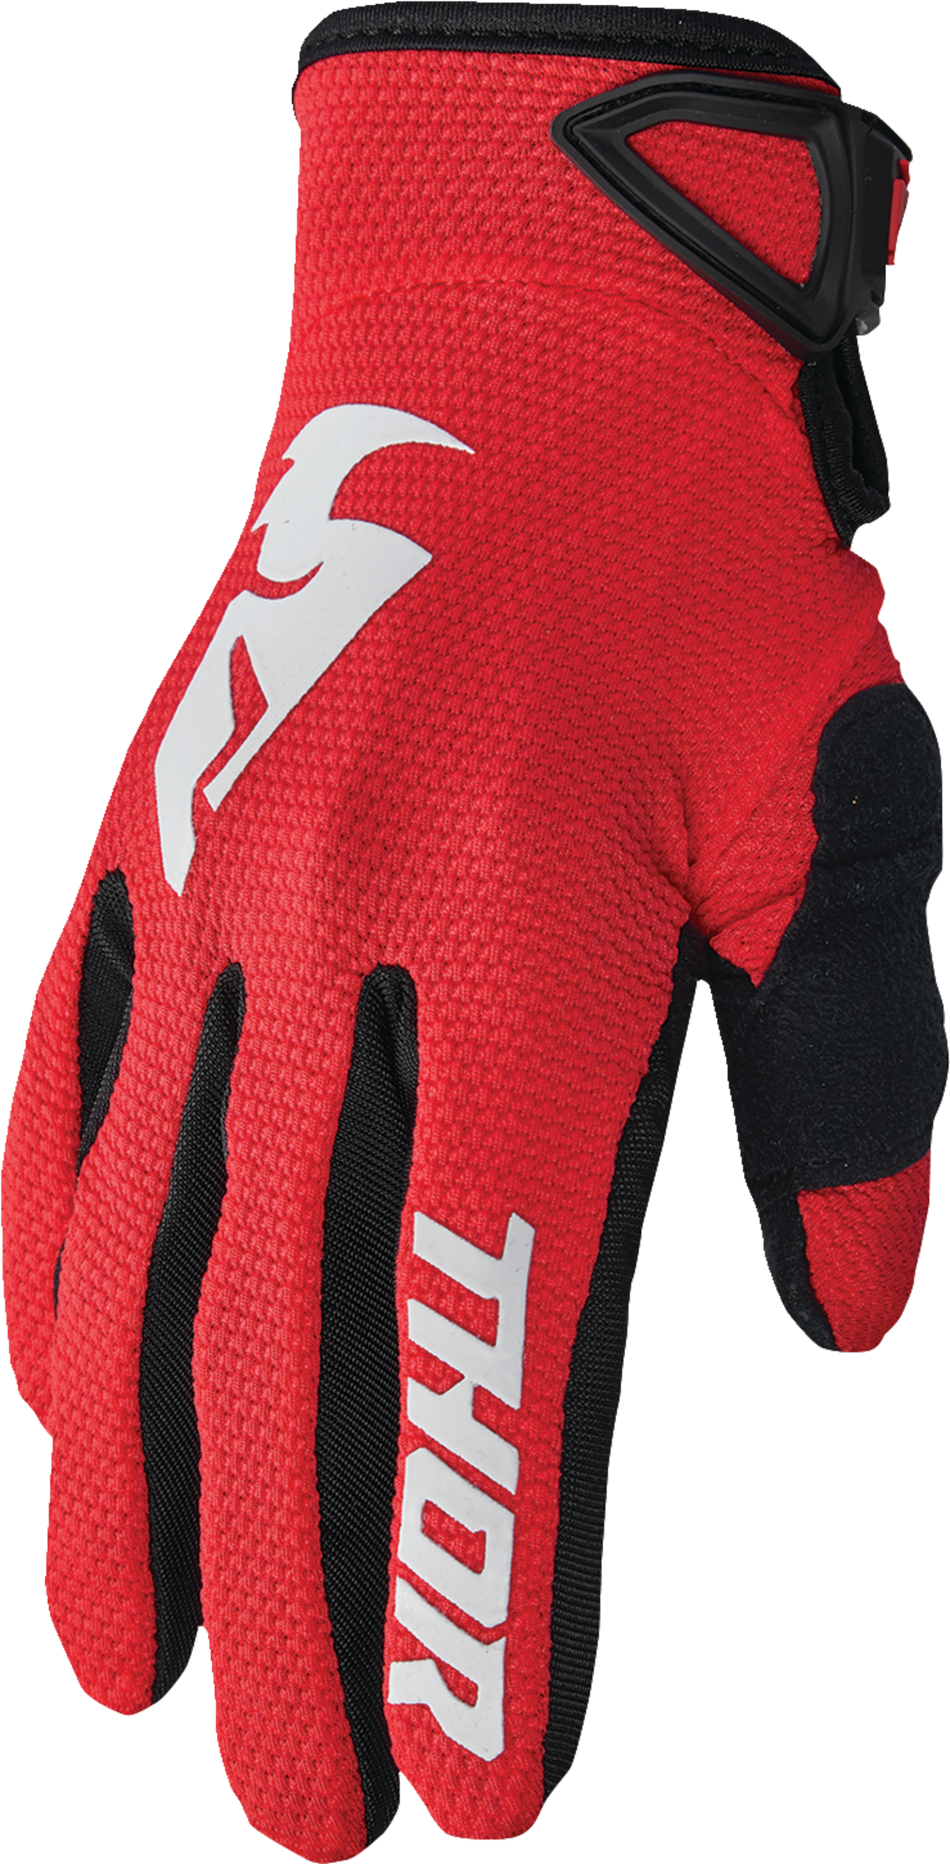 THOR Sector Gloves - Red/White - Small 3330-7268